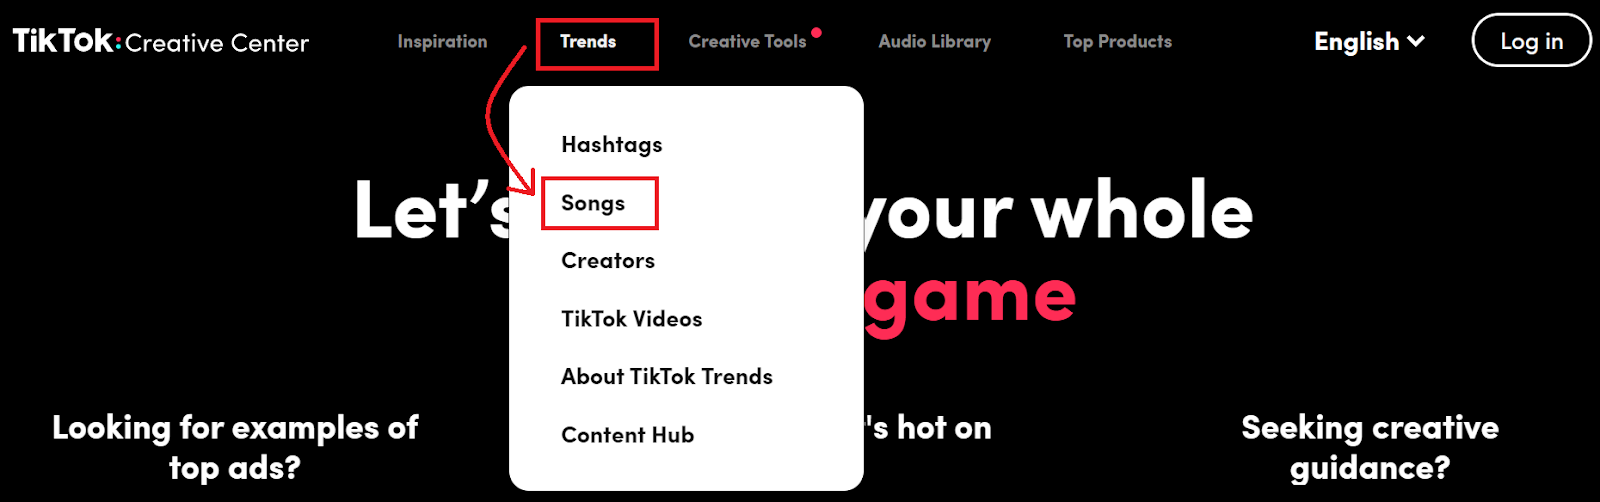 how to find trending sounds on TikTok Creative Center